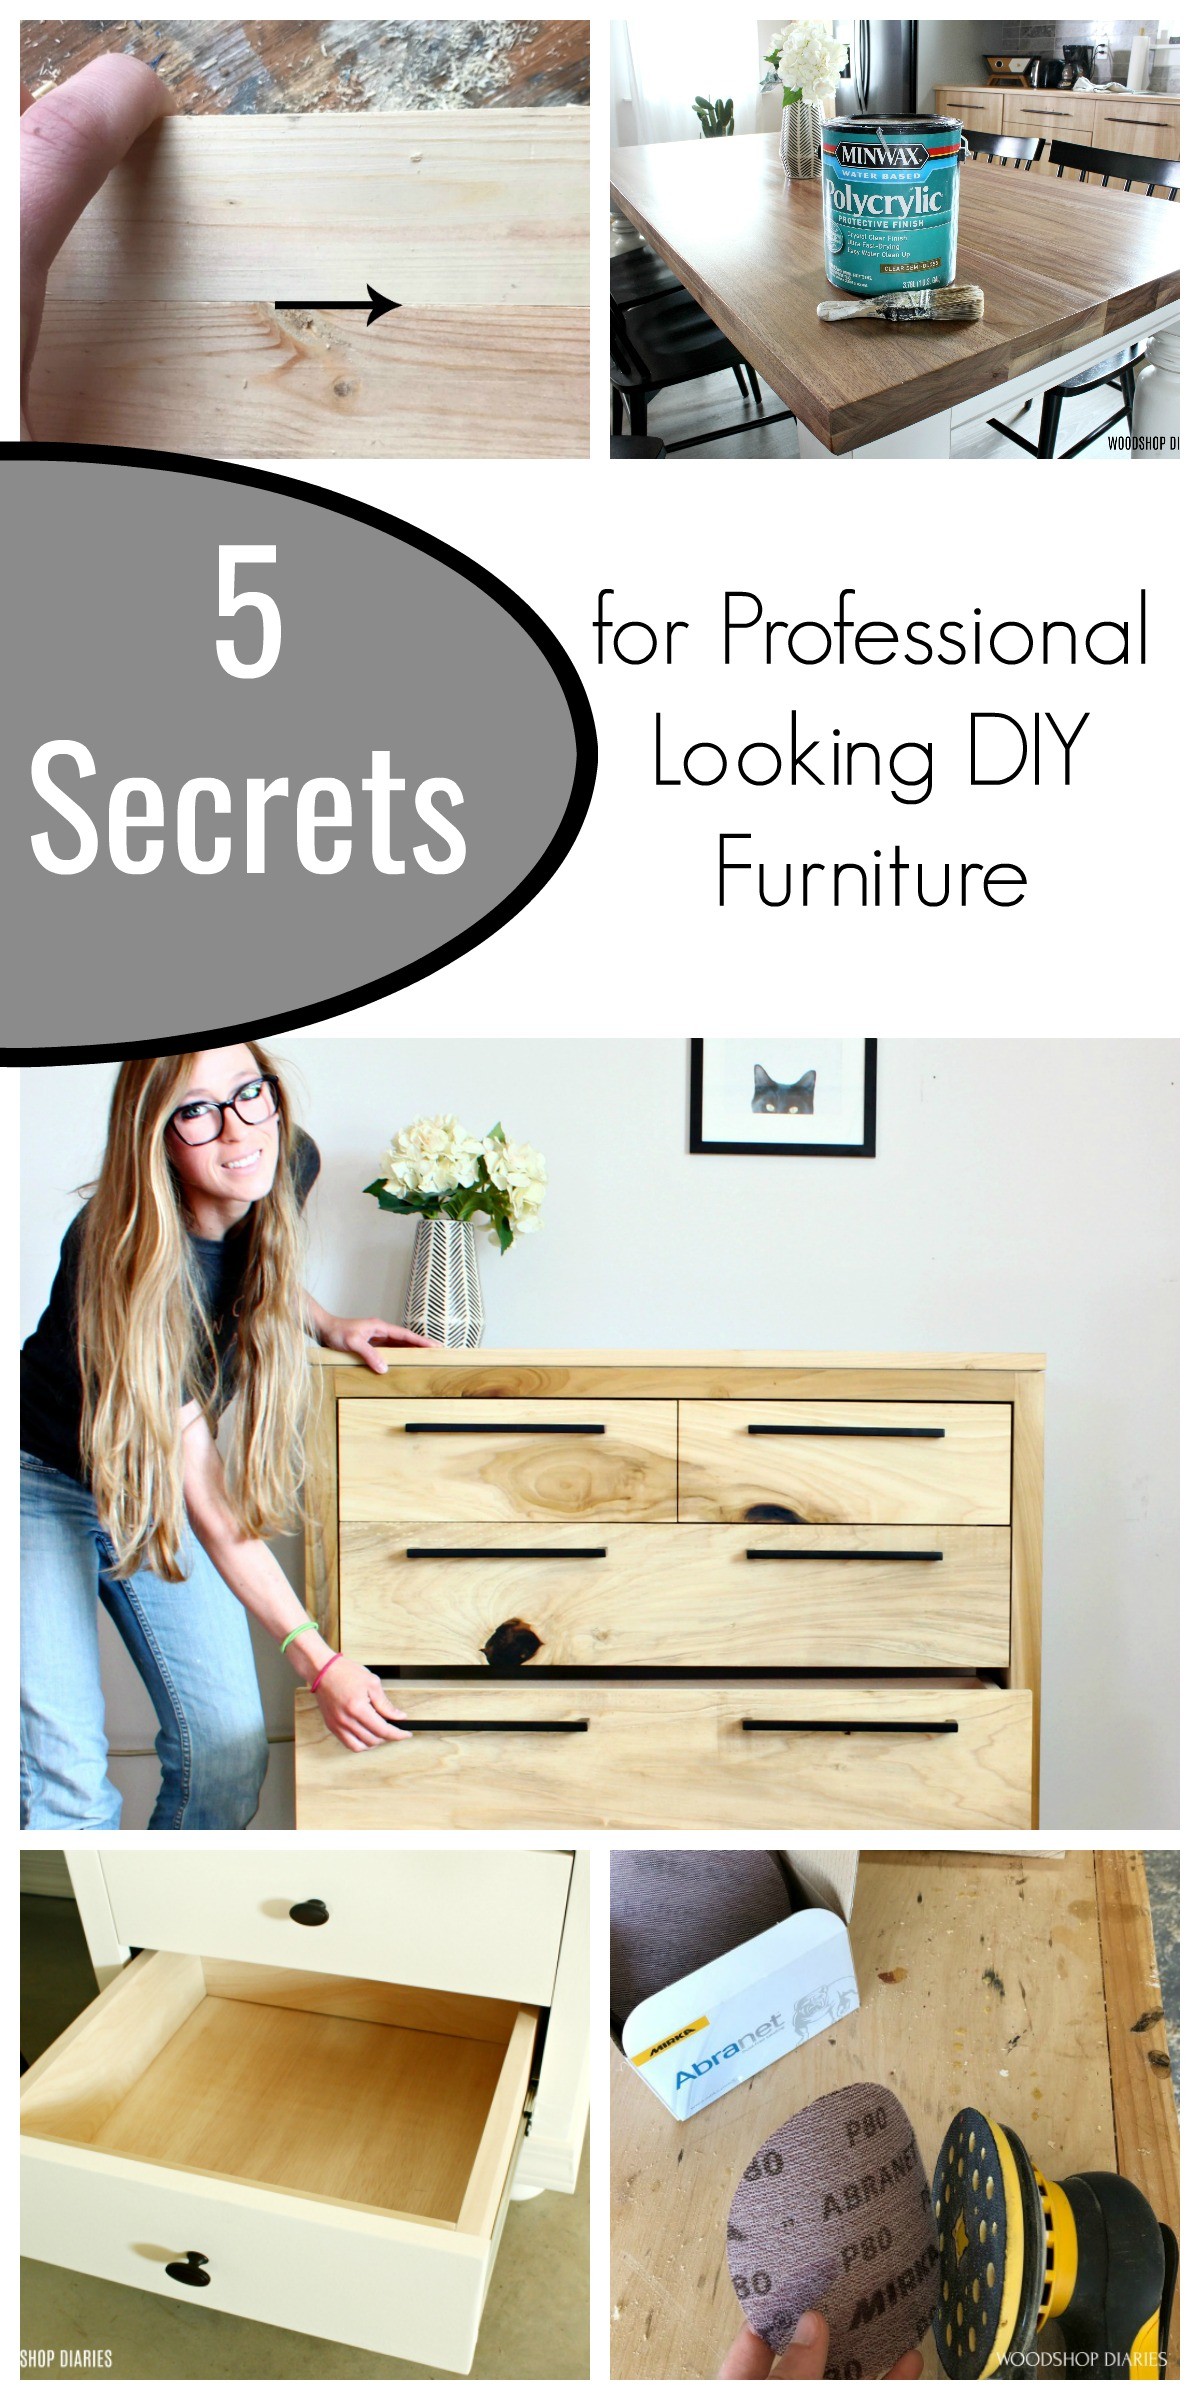 pinterest collage image for 5 secrets  for professional looking DIY furniture